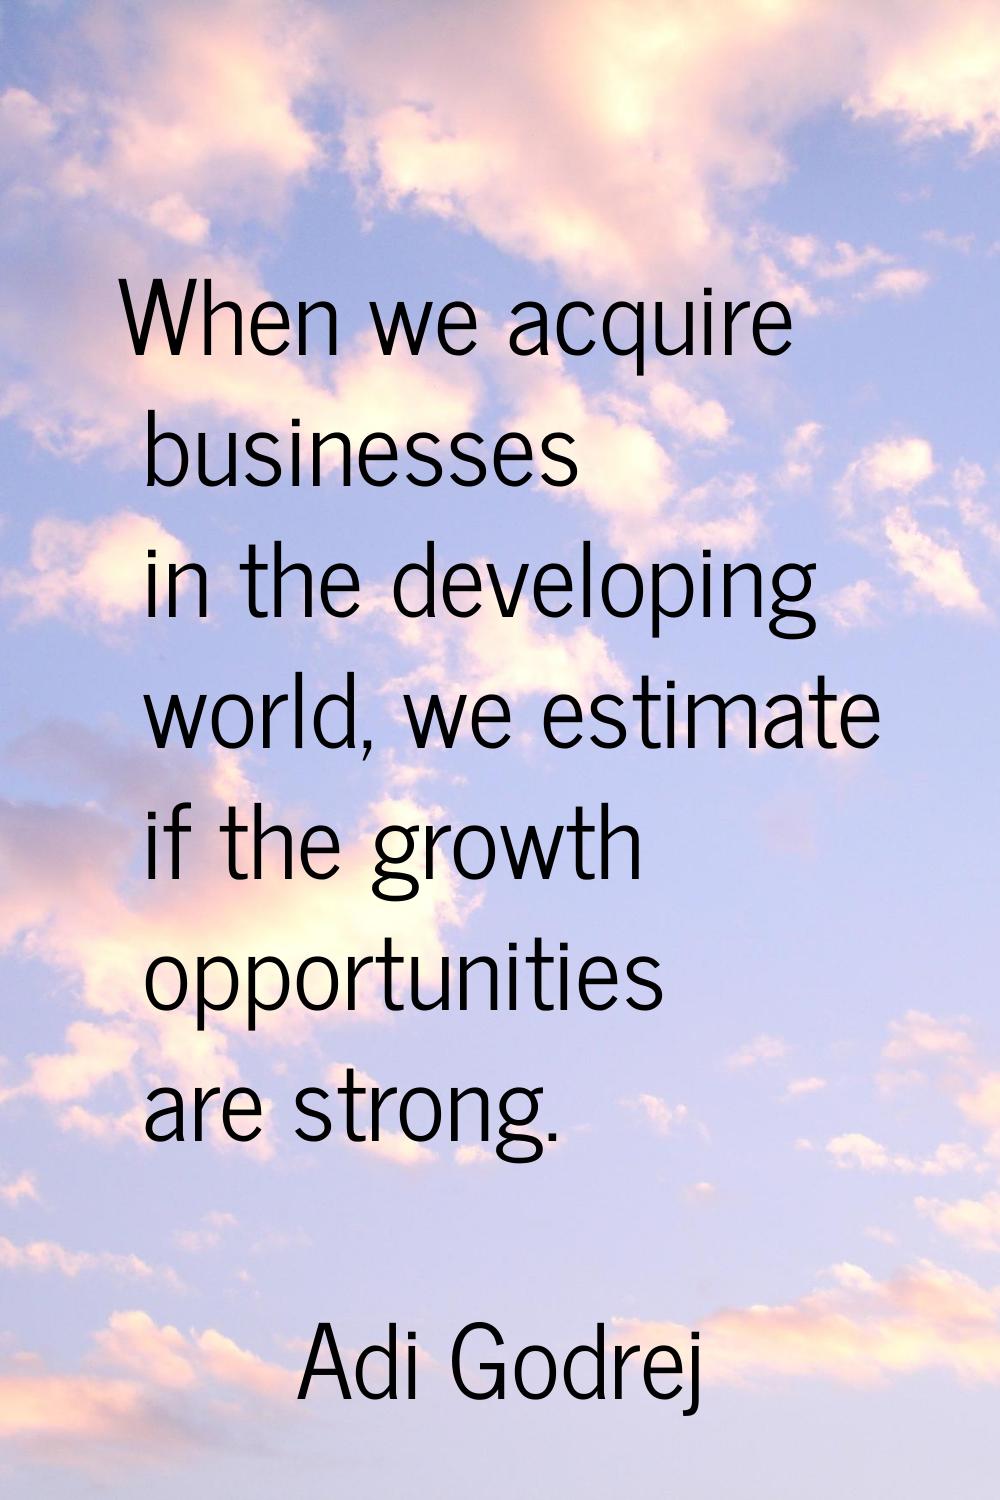 When we acquire businesses in the developing world, we estimate if the growth opportunities are str